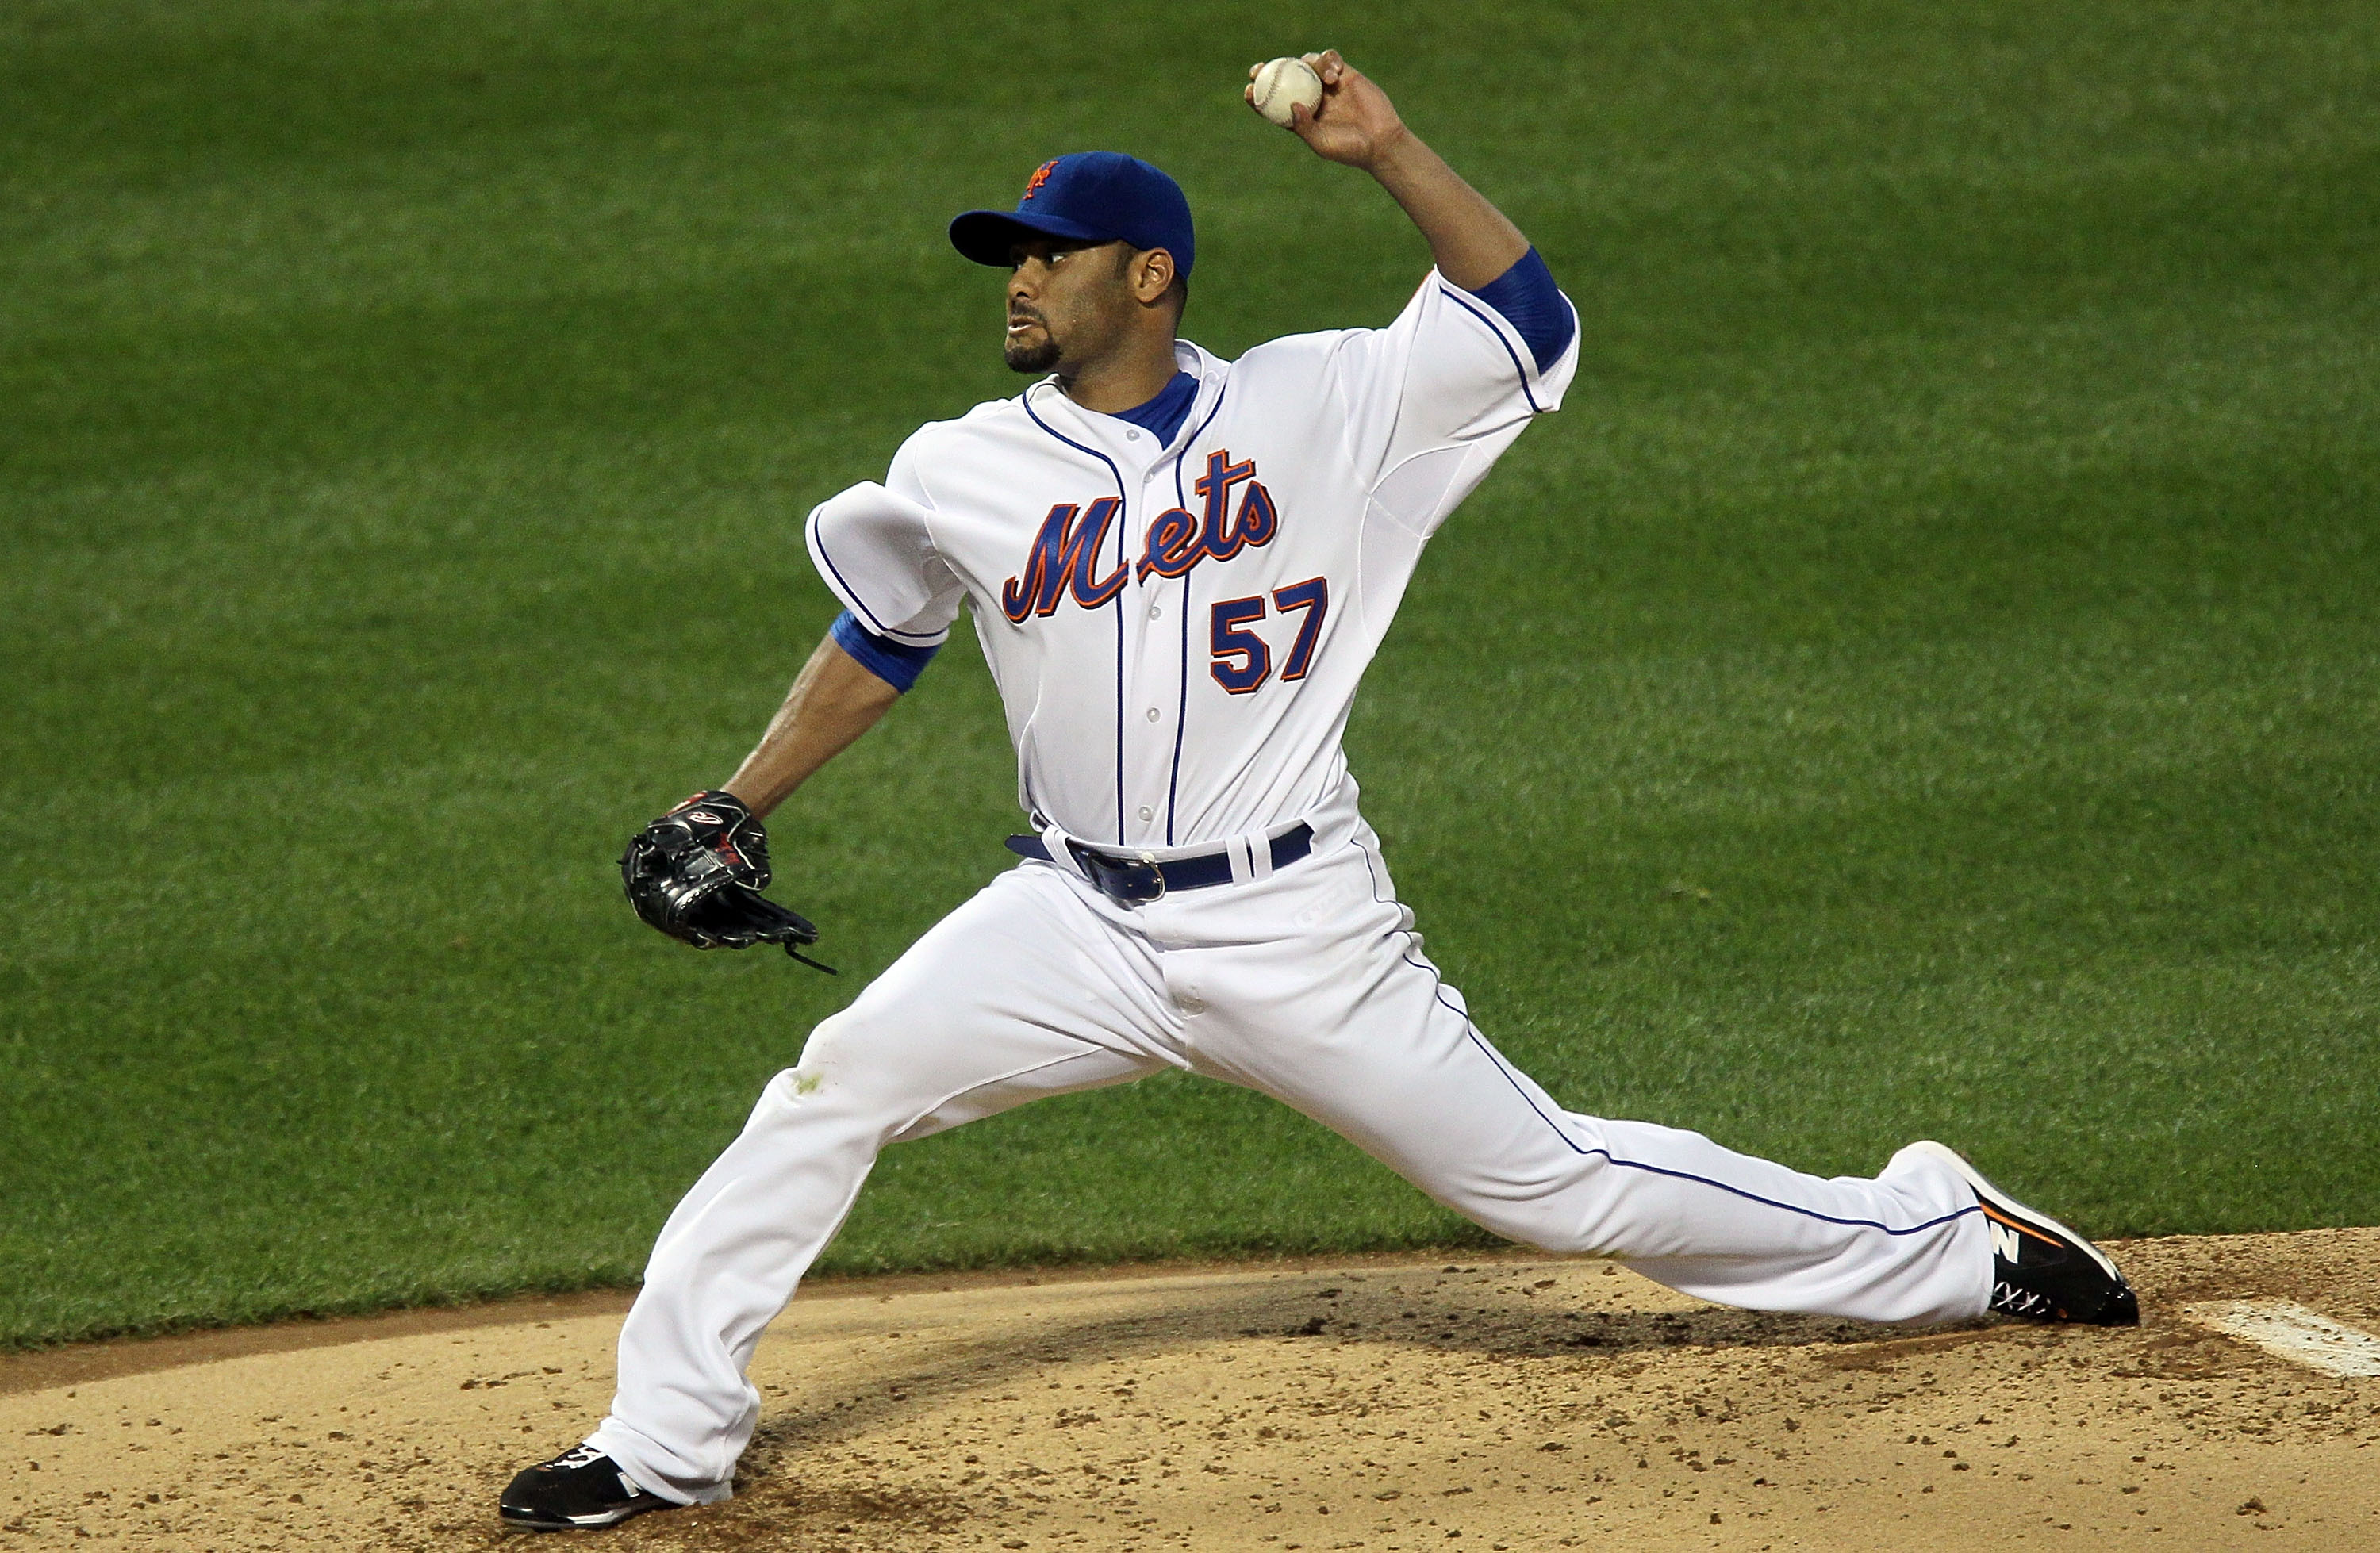 NEW YORK - AUGUST 28:  Johan Santana #57 of the New York Mets delivers a pitch against the Houston Astros on August 28, 2010 at Citi Field in the Flushing neighborhood of the Queens borough of New York City.  (Photo by Jim McIsaac/Getty Images)